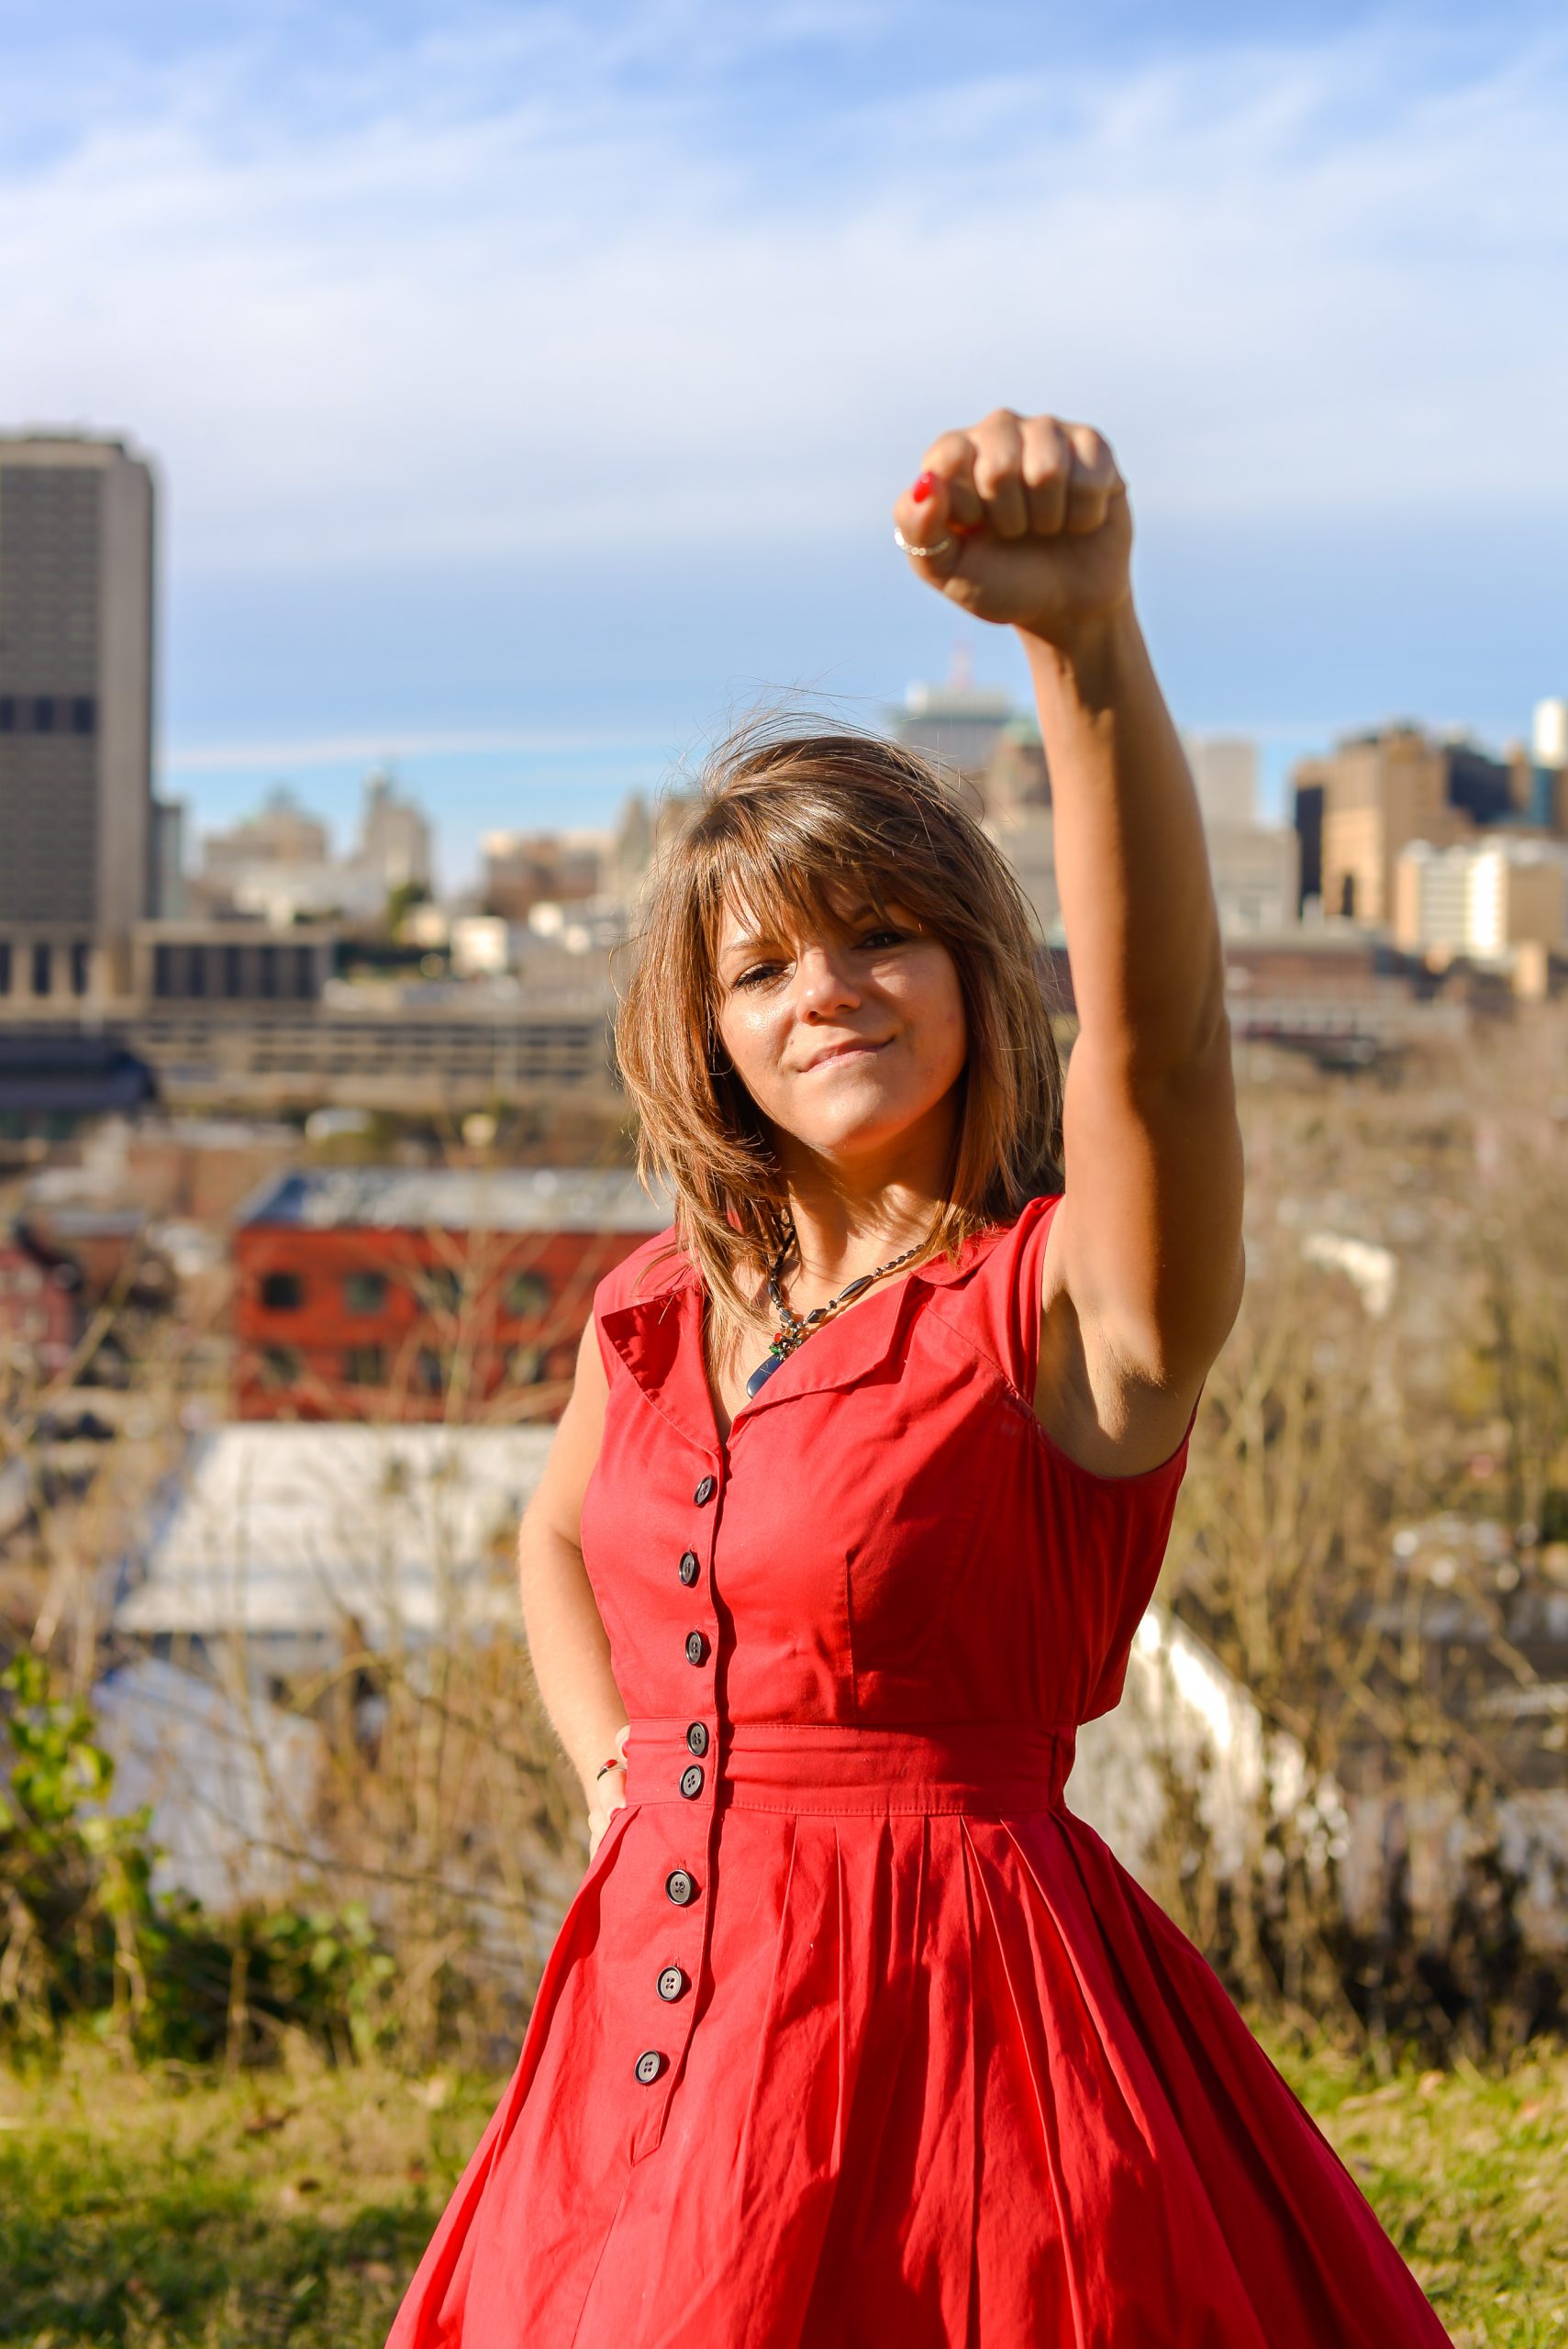 victorious, confident, fit, athletic, happy woman in red dress with city background, values are greater than motivation